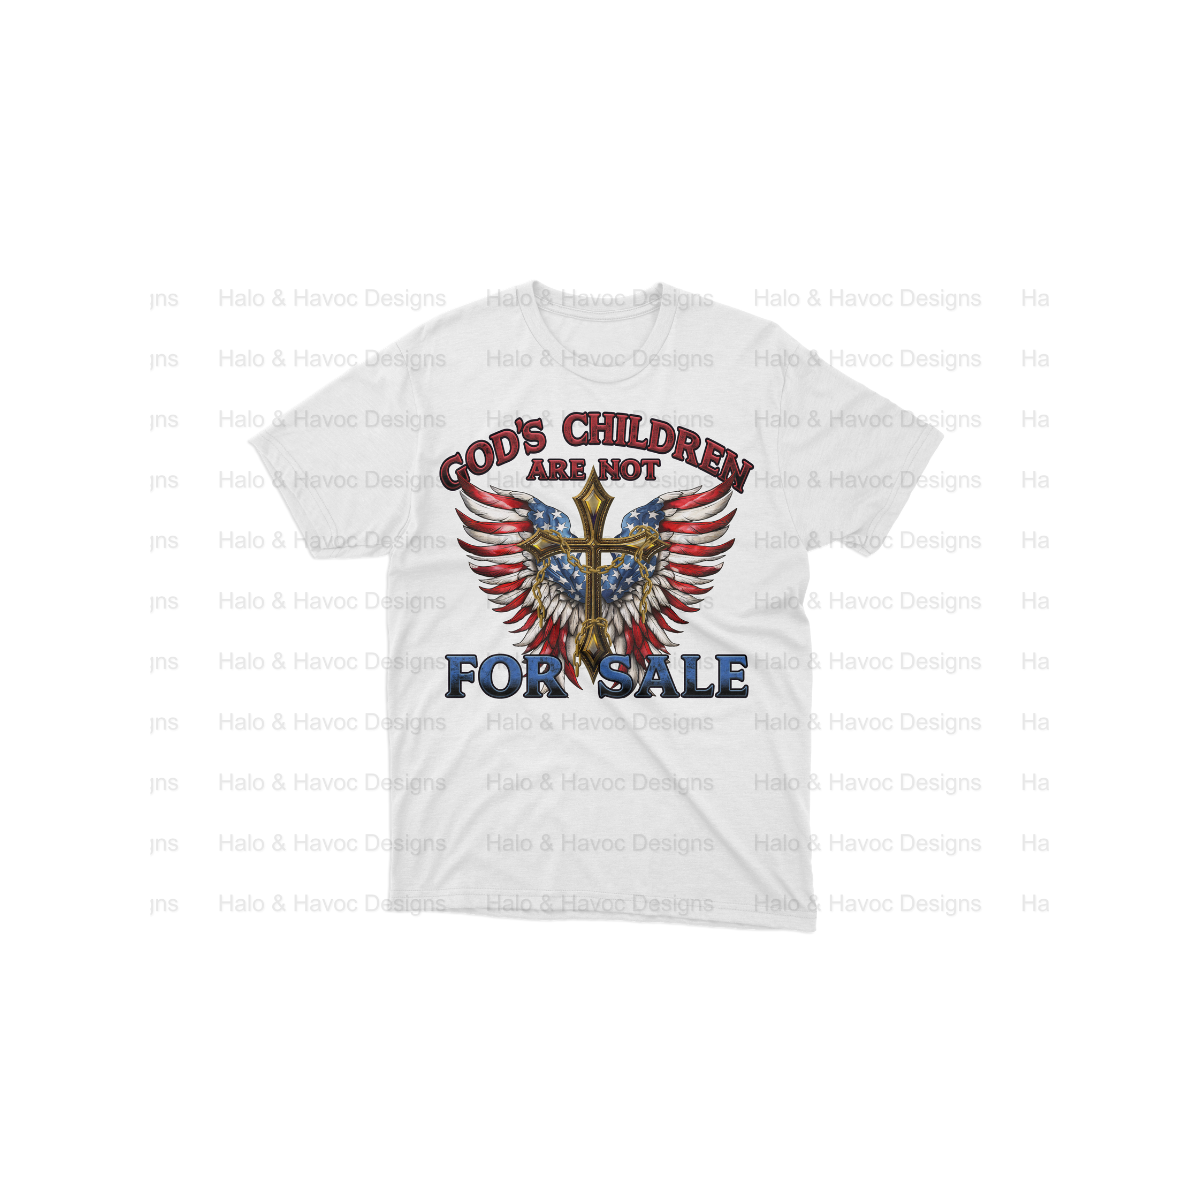 God's Children Are Not For Sale t-shirt